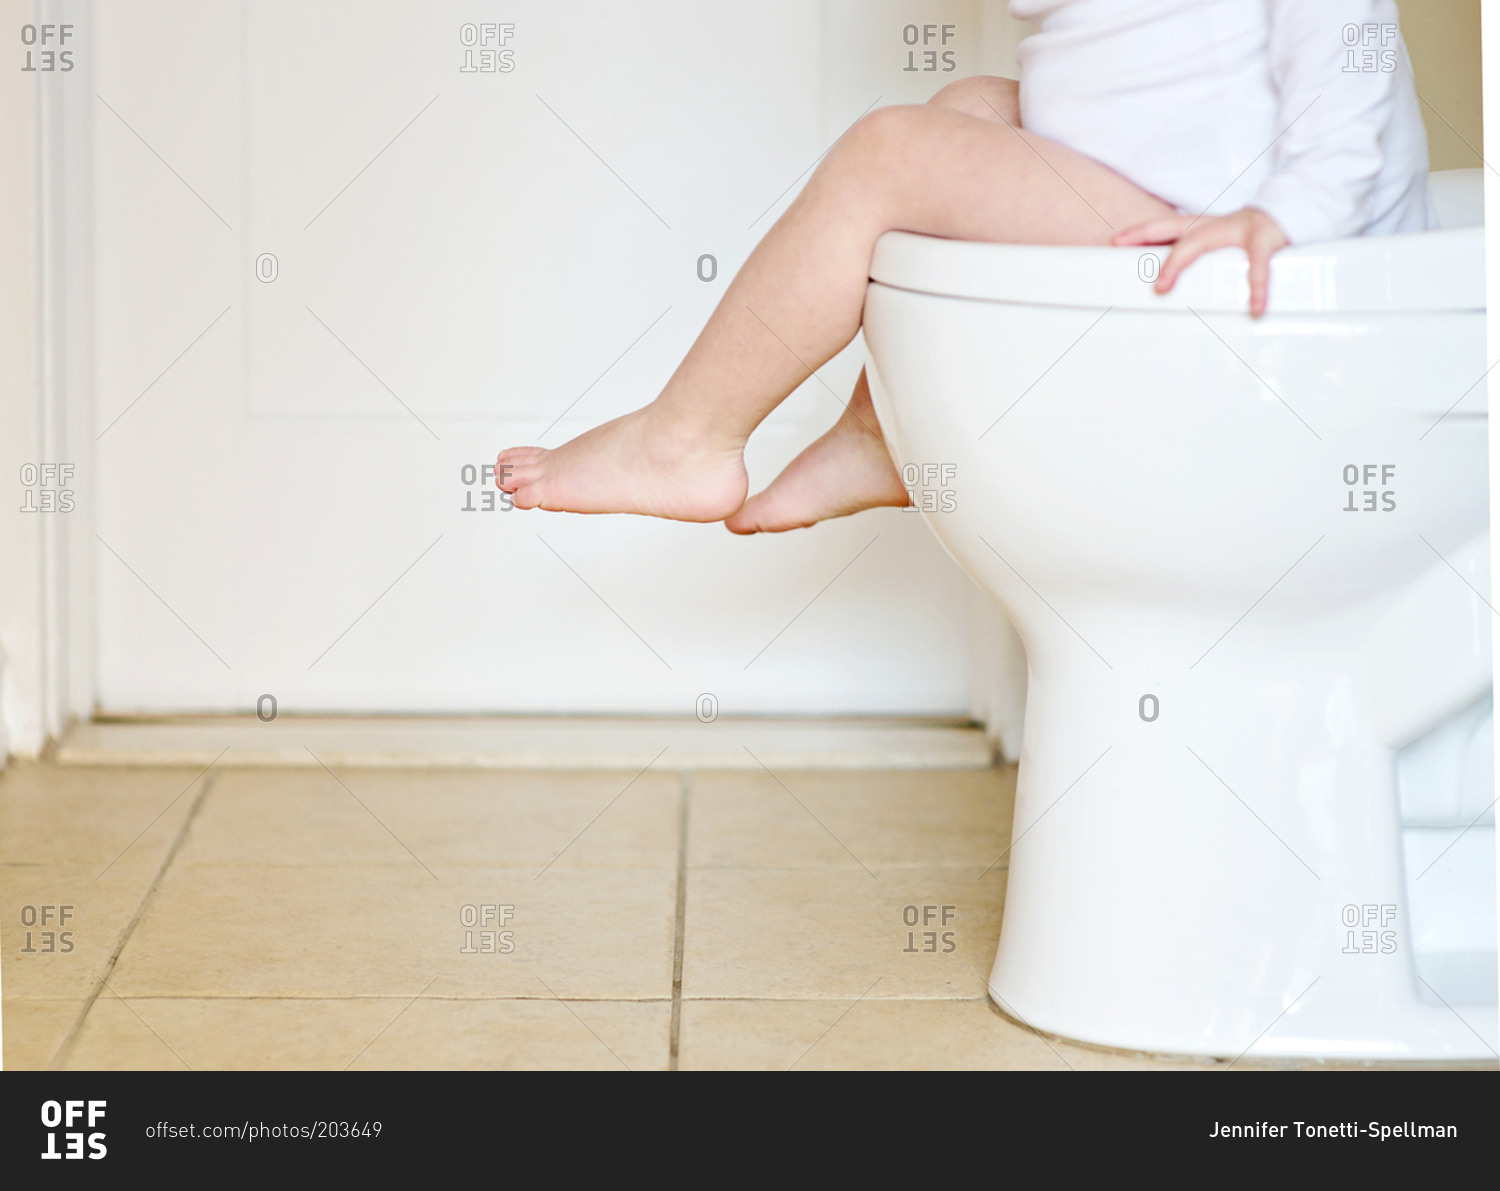 Child Sitting In Toilet And Holding Tissue Roll Stock 